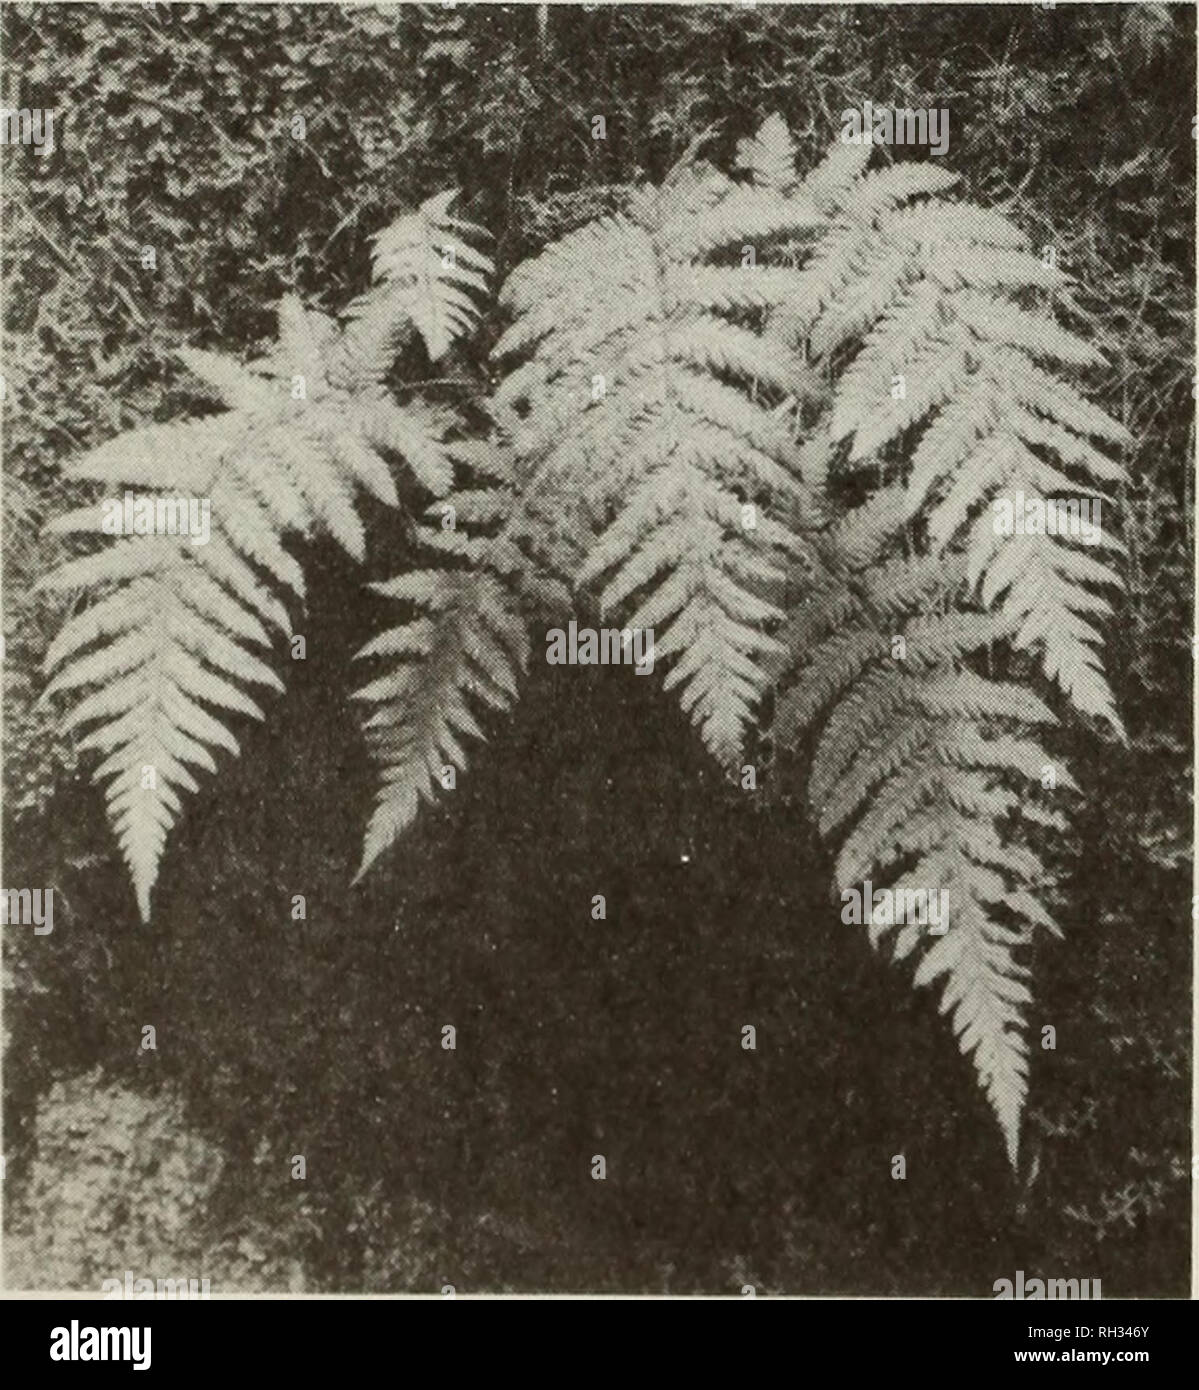 . The British fern gazette. Ferns. 324 BRITISH FERN GAZETTE: VOLUME 10 PART 6 (1973) Hymenophyllum itself contributes to the formation of its own substrate in collecting moist humus between the network of its tough rhizomes and old petioles. On Culcita the filmy fern can live even in southerly-exposed, windy habitats (Pico de Barrosa, 900 m e.g.) being in the shelter of both Culcita and other shrubs, while in open Cryptomeria forests it can survive as a relic and even climb up on these trunks. It is rarely found on rocks. The species was fertile and luxuriantly sporulating in all places where  Stock Photo